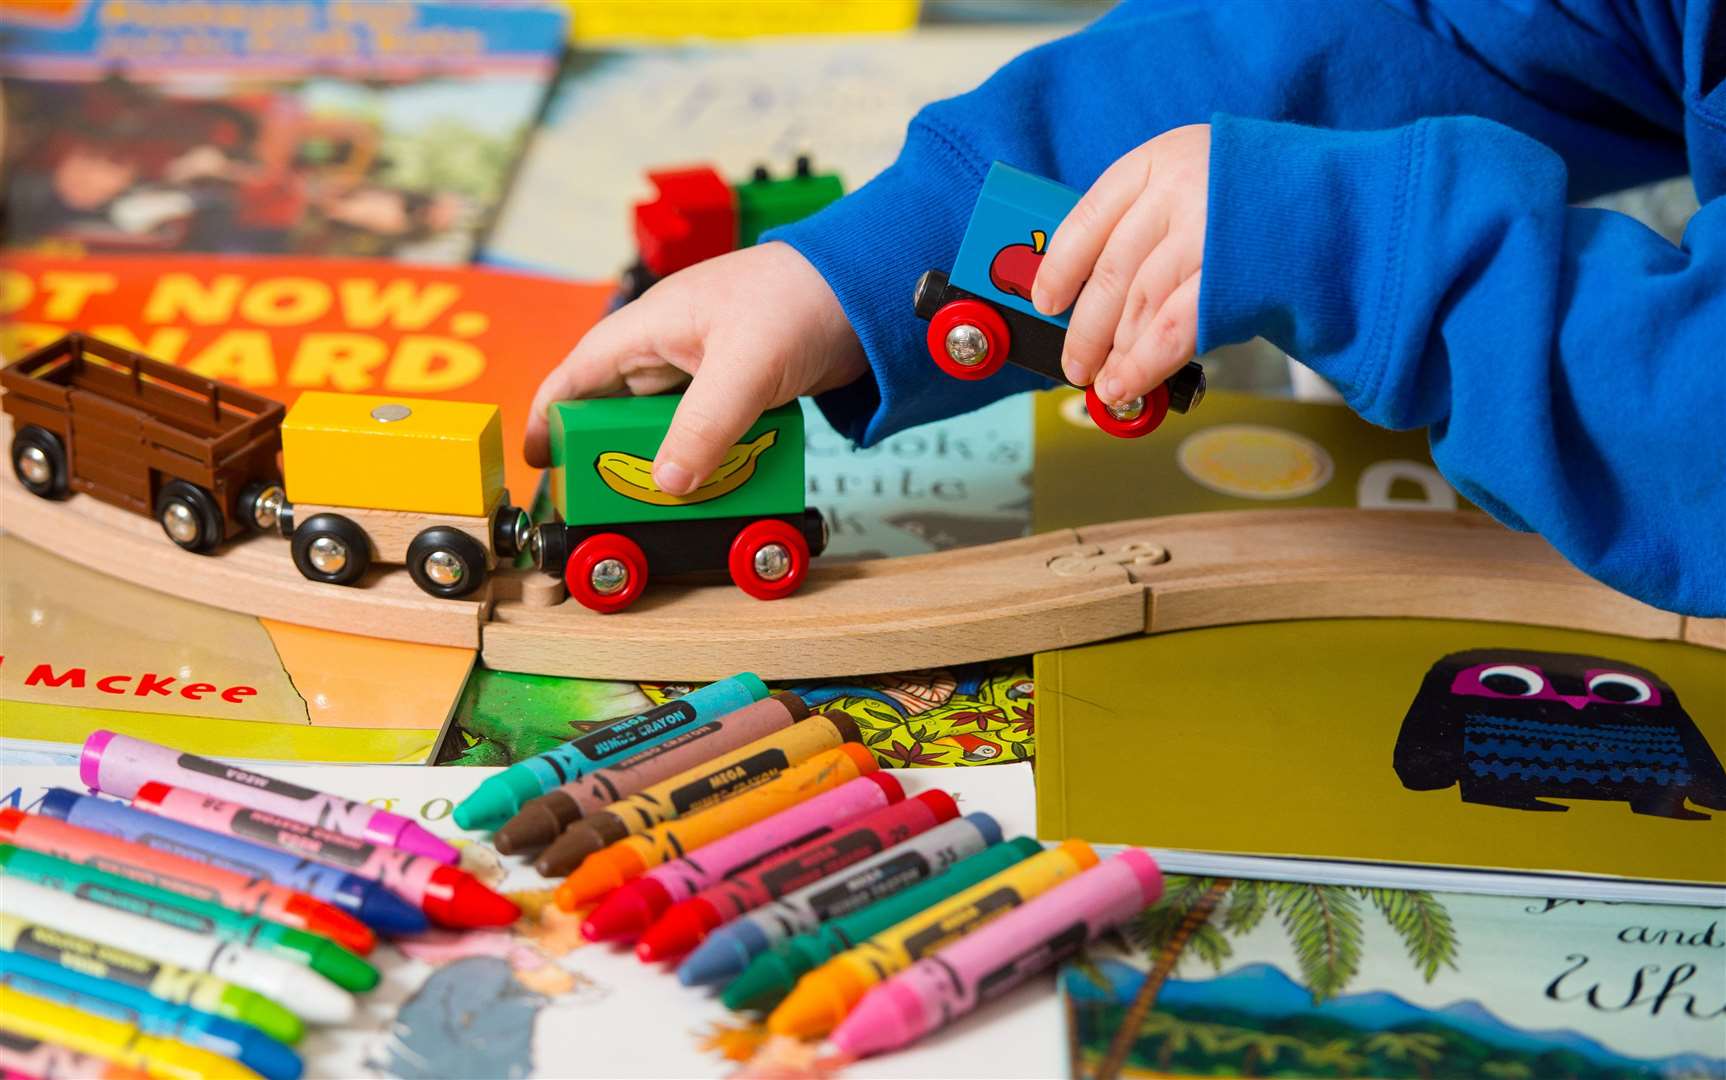 Despite an ‘Inadequate’ rating, Ofsted inspectors found the curriculum at Squirrels Preschool in Cantebury caters to children’s interests and learning needs. Picture: Stock – Dominic Lipinski/ PA